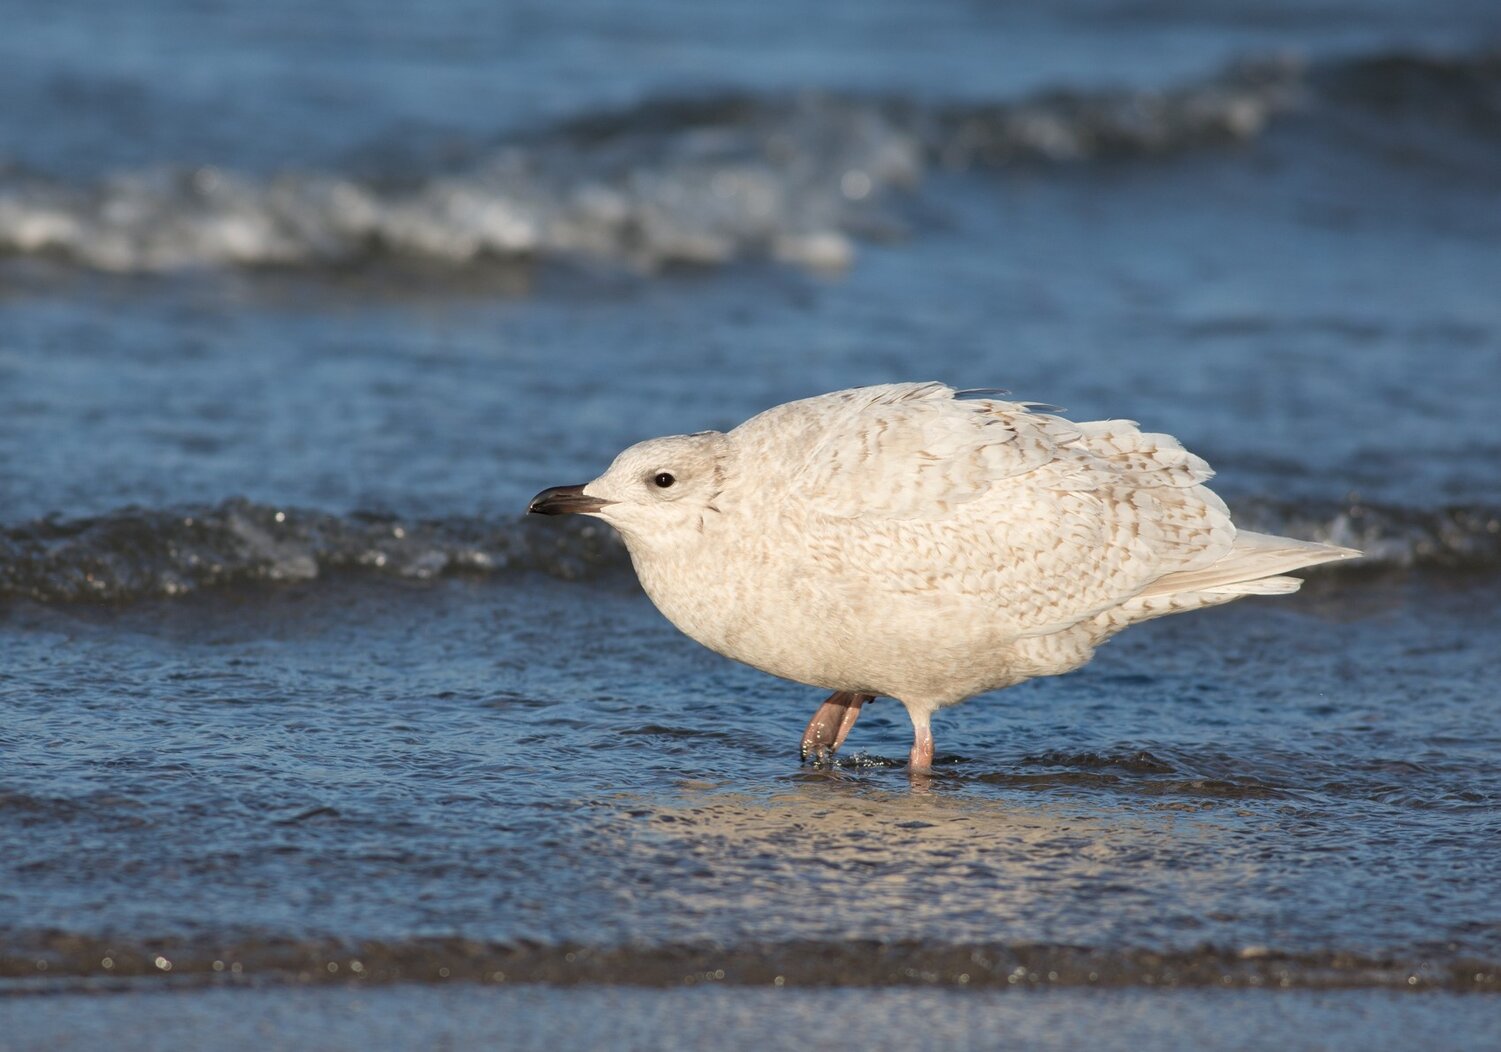 The pale Iceland Gull is among the less common gull species sometimes spotted at Coney Island Creek Park in the wintertime.” Photo: Douglas Gochfeld